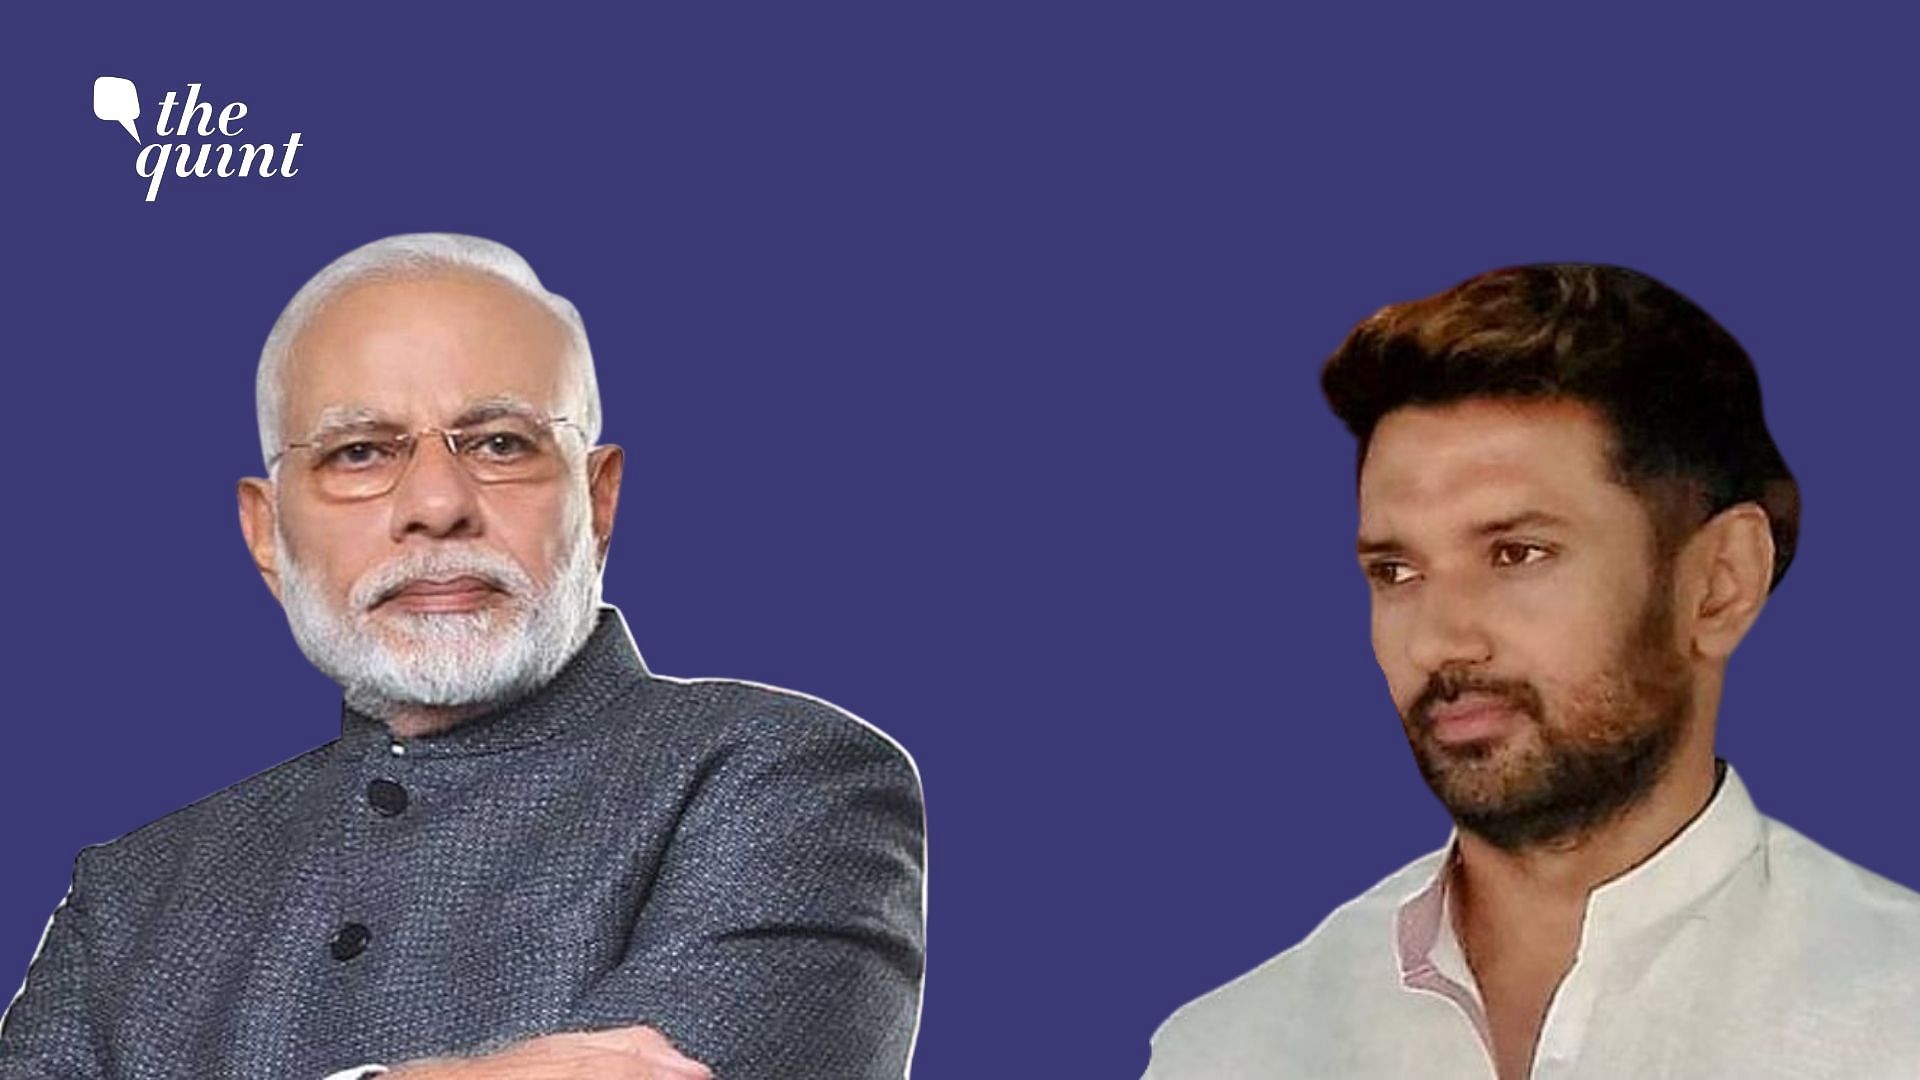 Ahead of Assembly elections in Bihar, LJP leader Chirag Paswan, on Friday, 16 October, said that he doesn’t need photos of PM Modi in his campaign, as PM Modi was the Ram to his Hanuman.